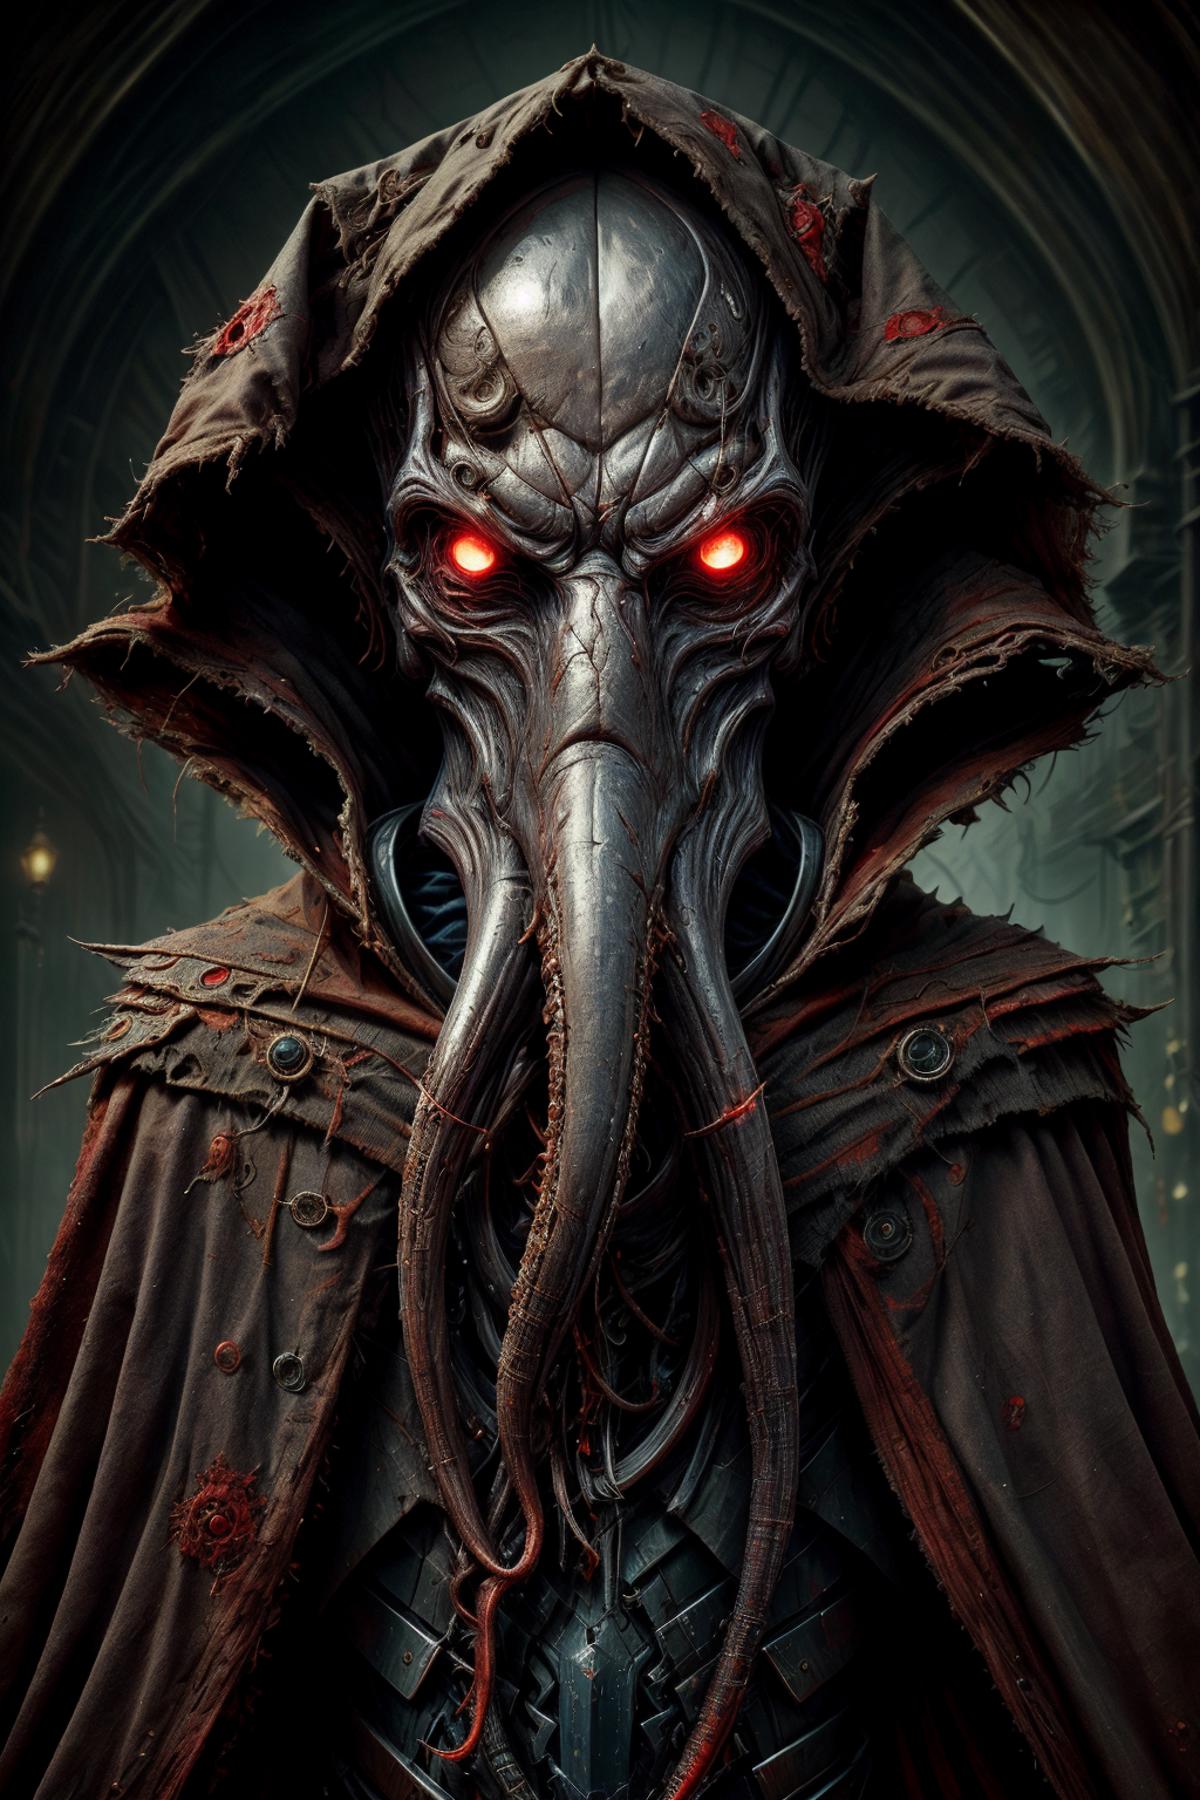 Mind Flayer (illithid) lora image by balbrig